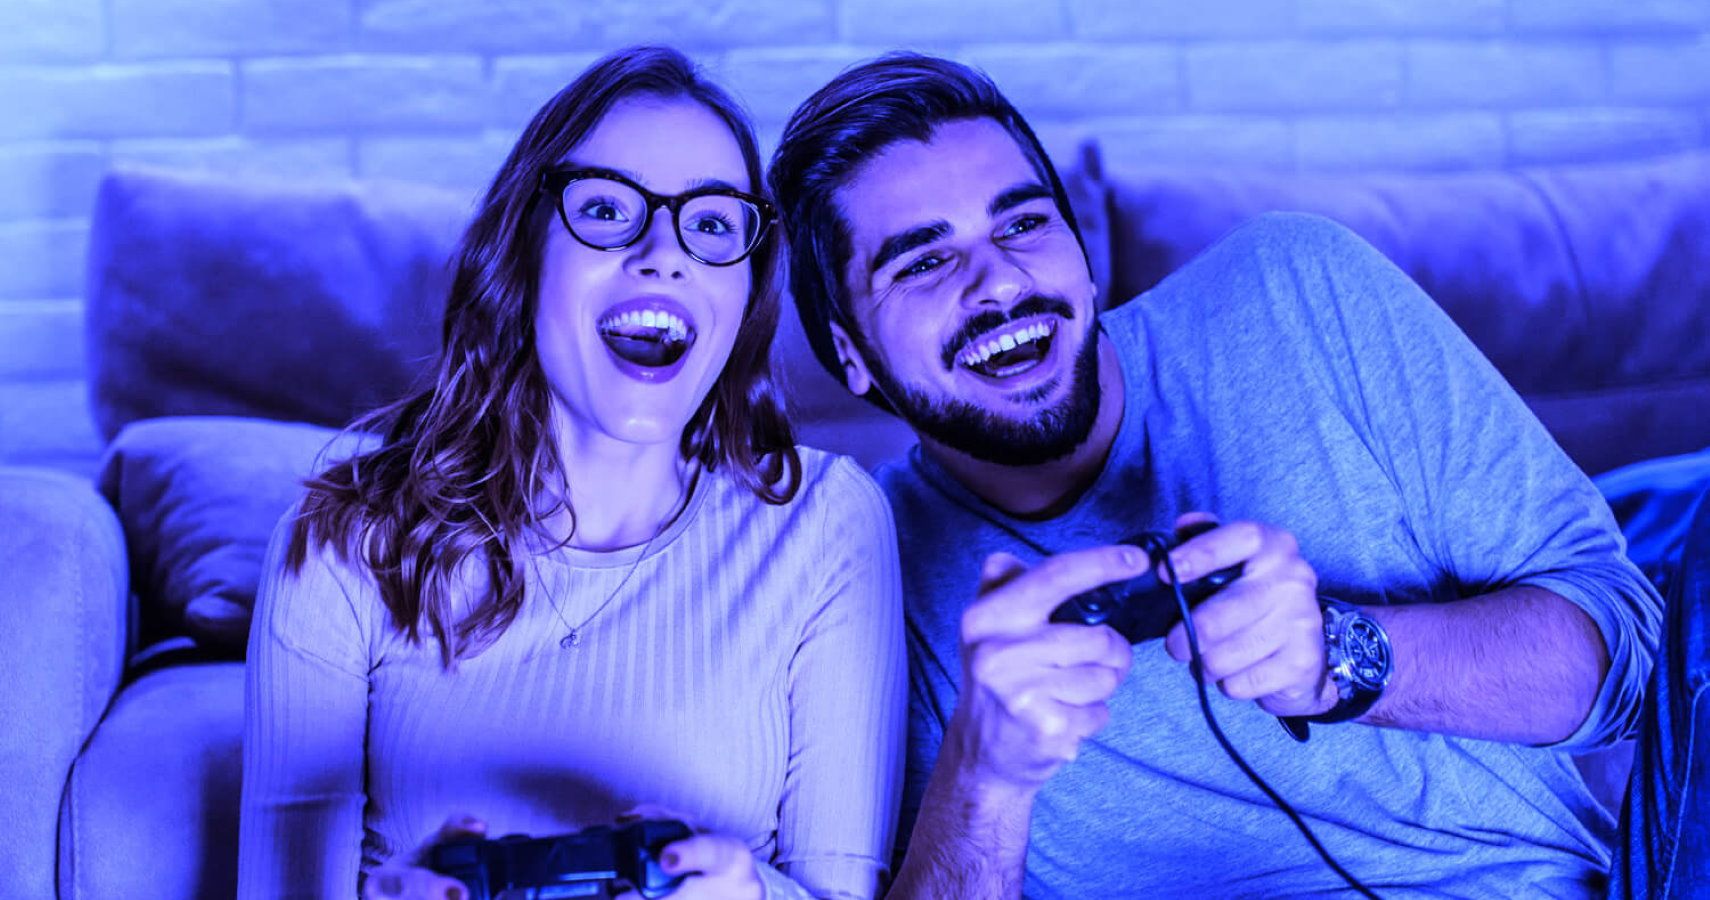 This Intensive Gaming Course’ Promises To Make You As Pro As Your Partner So You Can Play Together